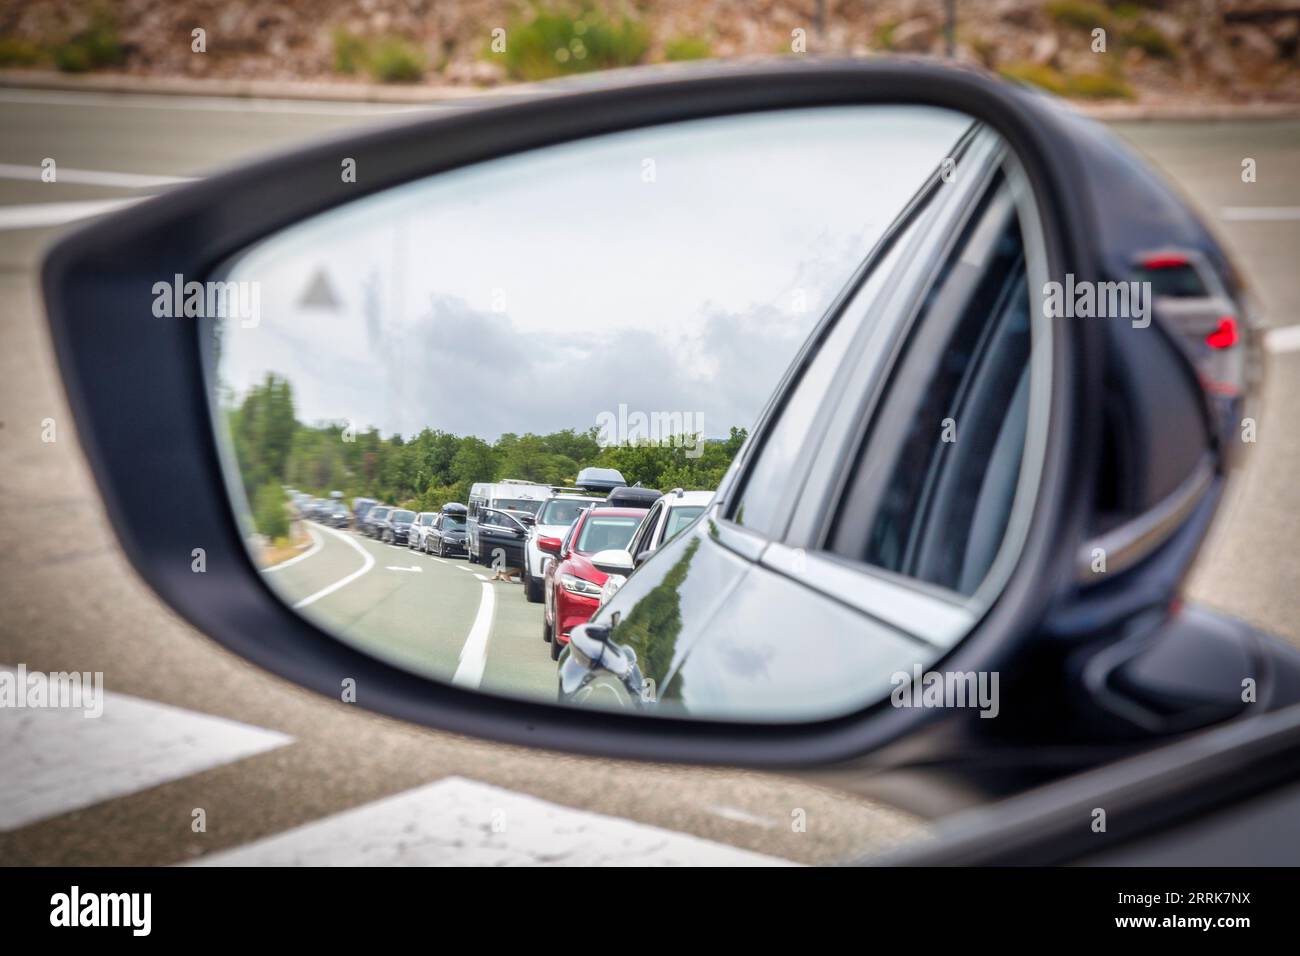 Croatia, Lika-Senj County, municipality of Senj, port of Stinica, cars in queue waiting for the ferry seen from the outside rear view mirror of the car Stock Photo